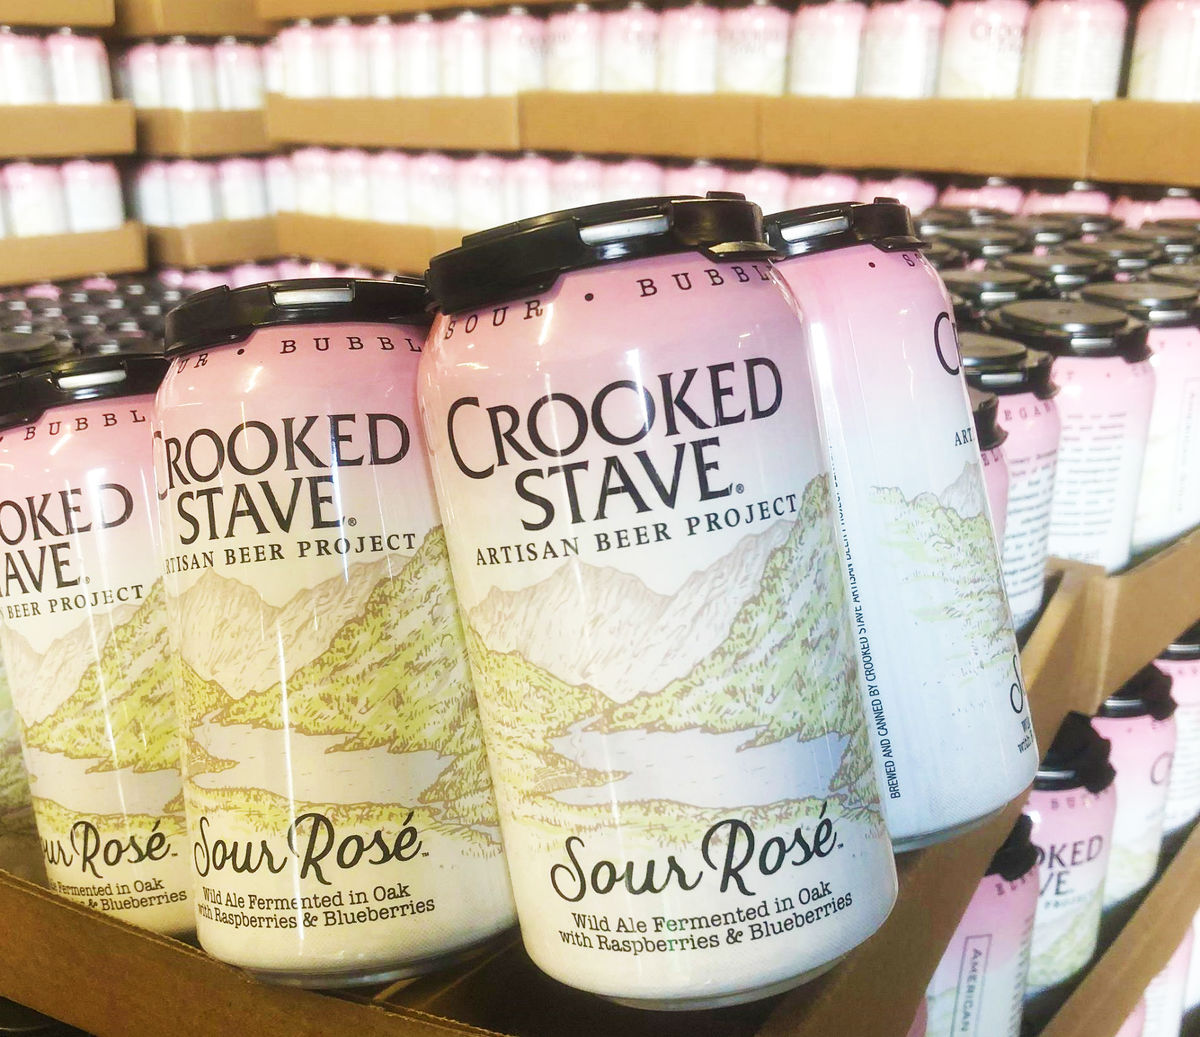 Cans of Crooked Stave Artisna Beer Project's Sour Rosé  - Wild Ale Fermented in Oak with Rasberries & Blueberries